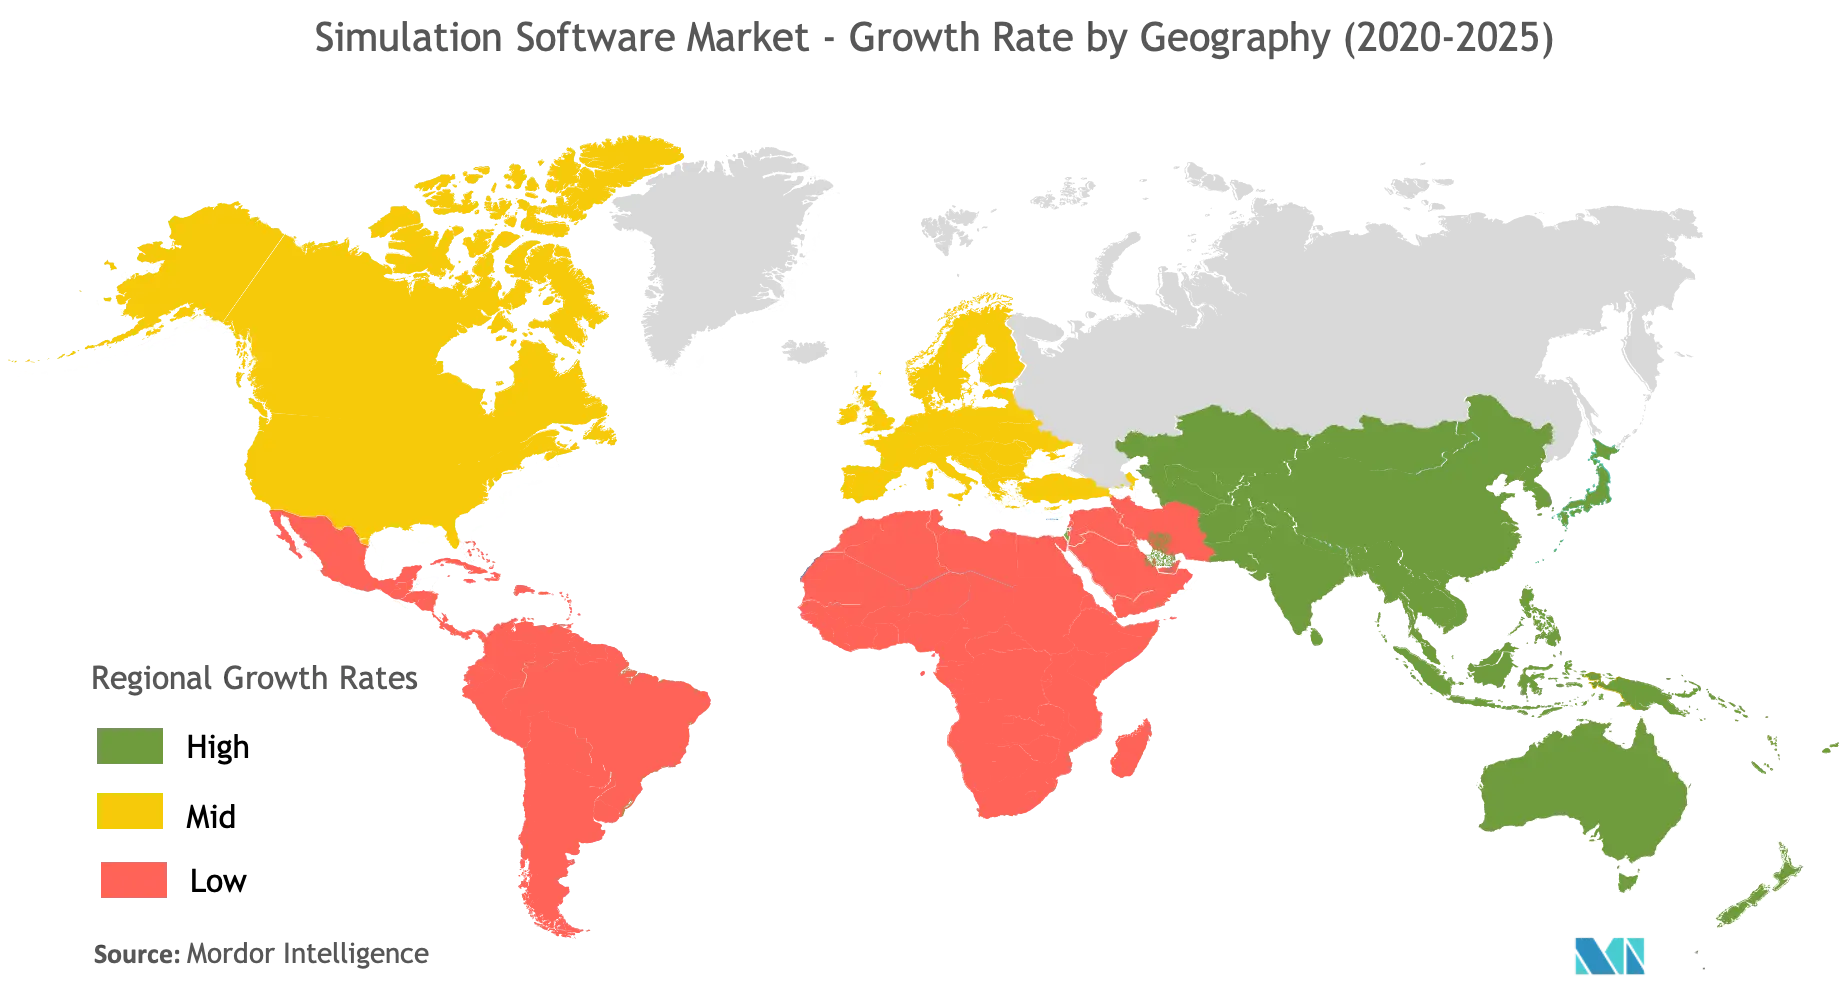 Simulation Software Market - Growth Rate by Geography (2020 - 2025)